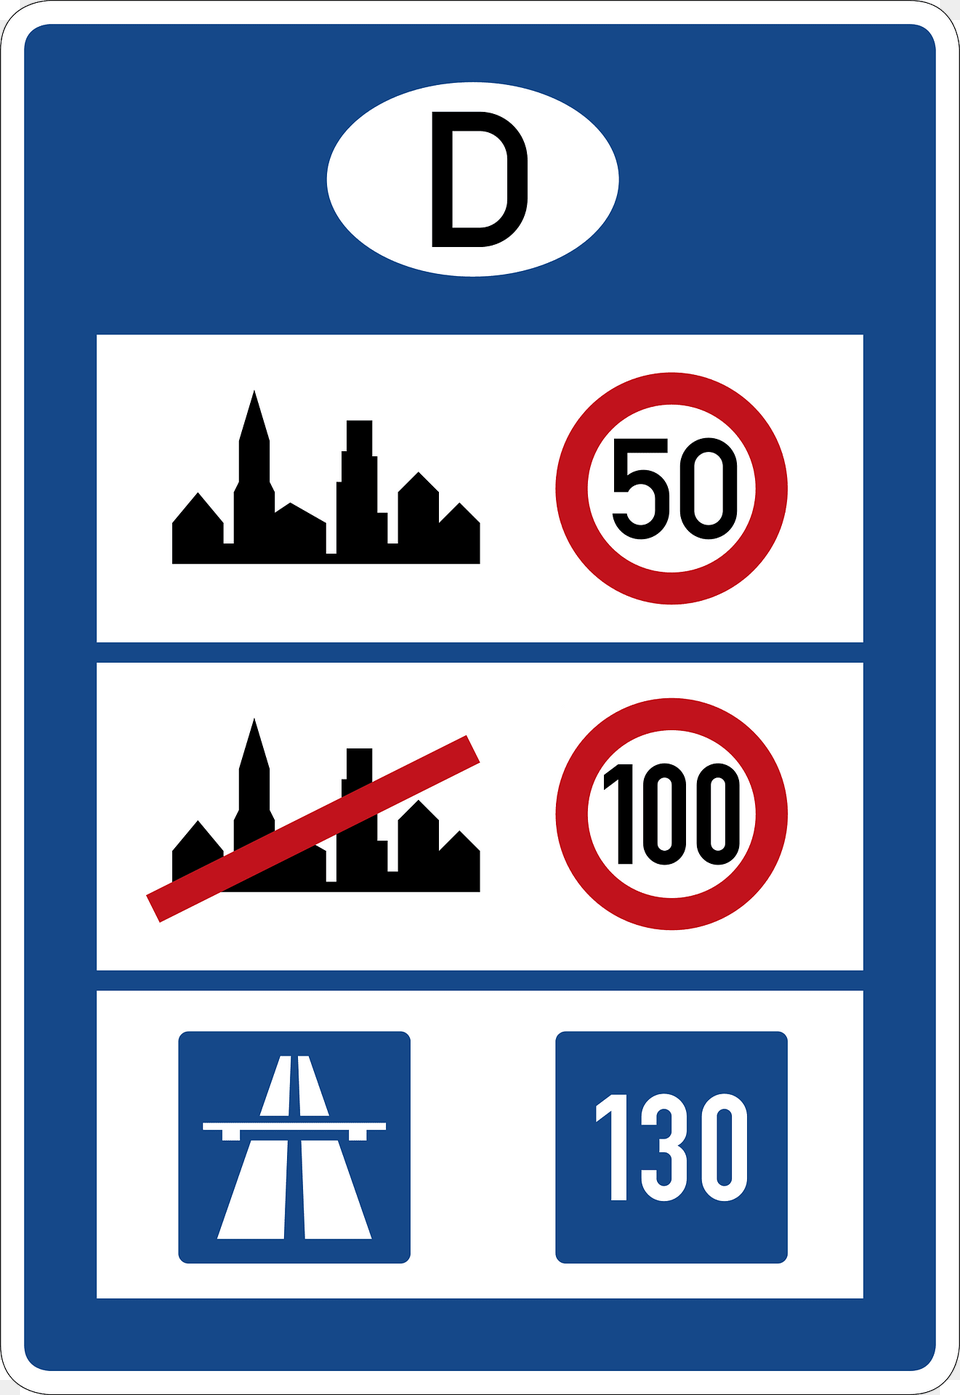 Maximum Or Recommended Speeds In Germany For Developedurban Areas 50 Bundesstraen 100 Amp Autobahn 130 Clipart, Sign, Symbol, Road Sign, Scoreboard Png